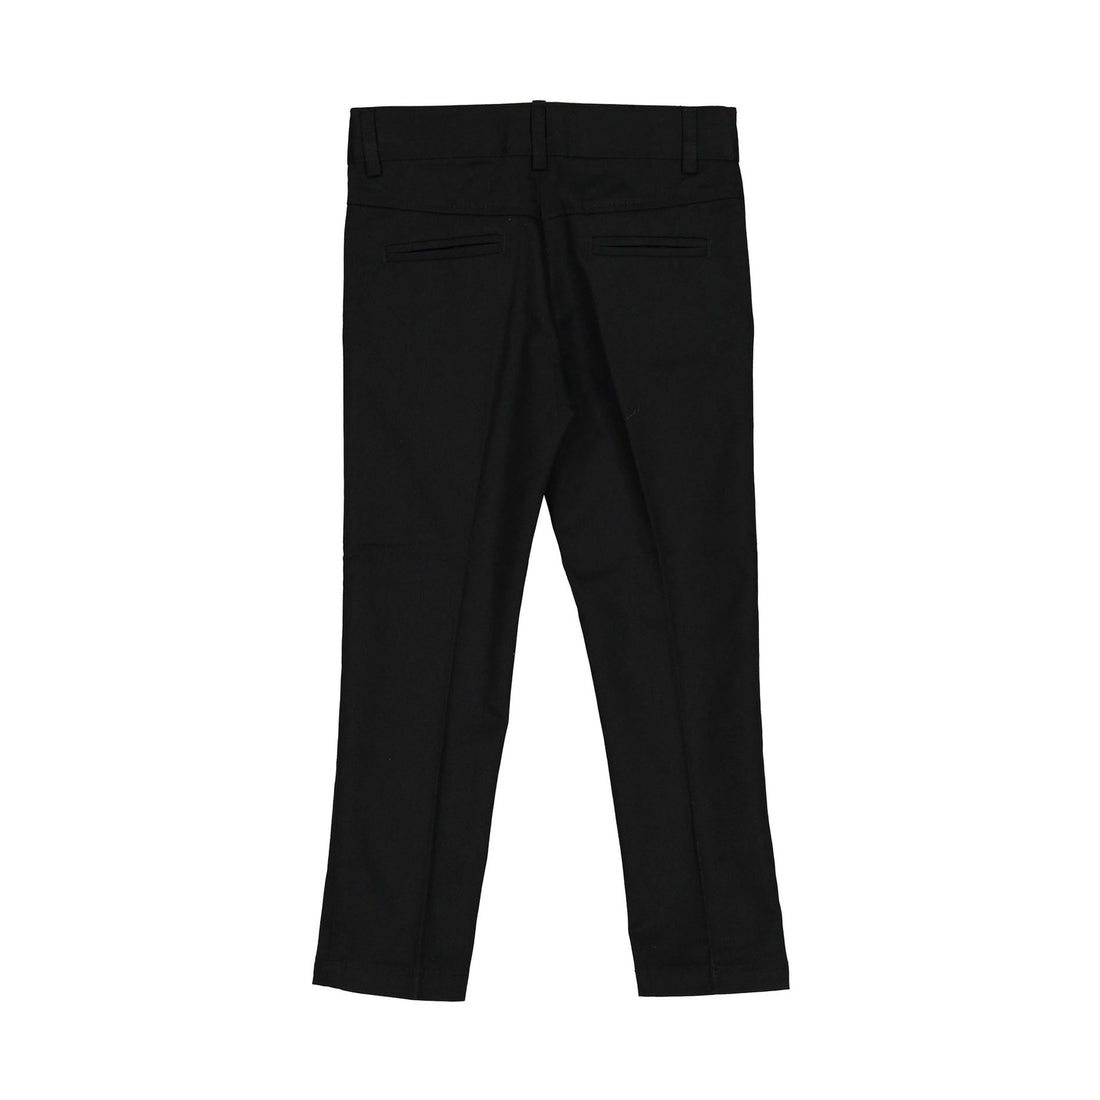 Boys and Arrows Black Brushed Cotton Skinny Pants